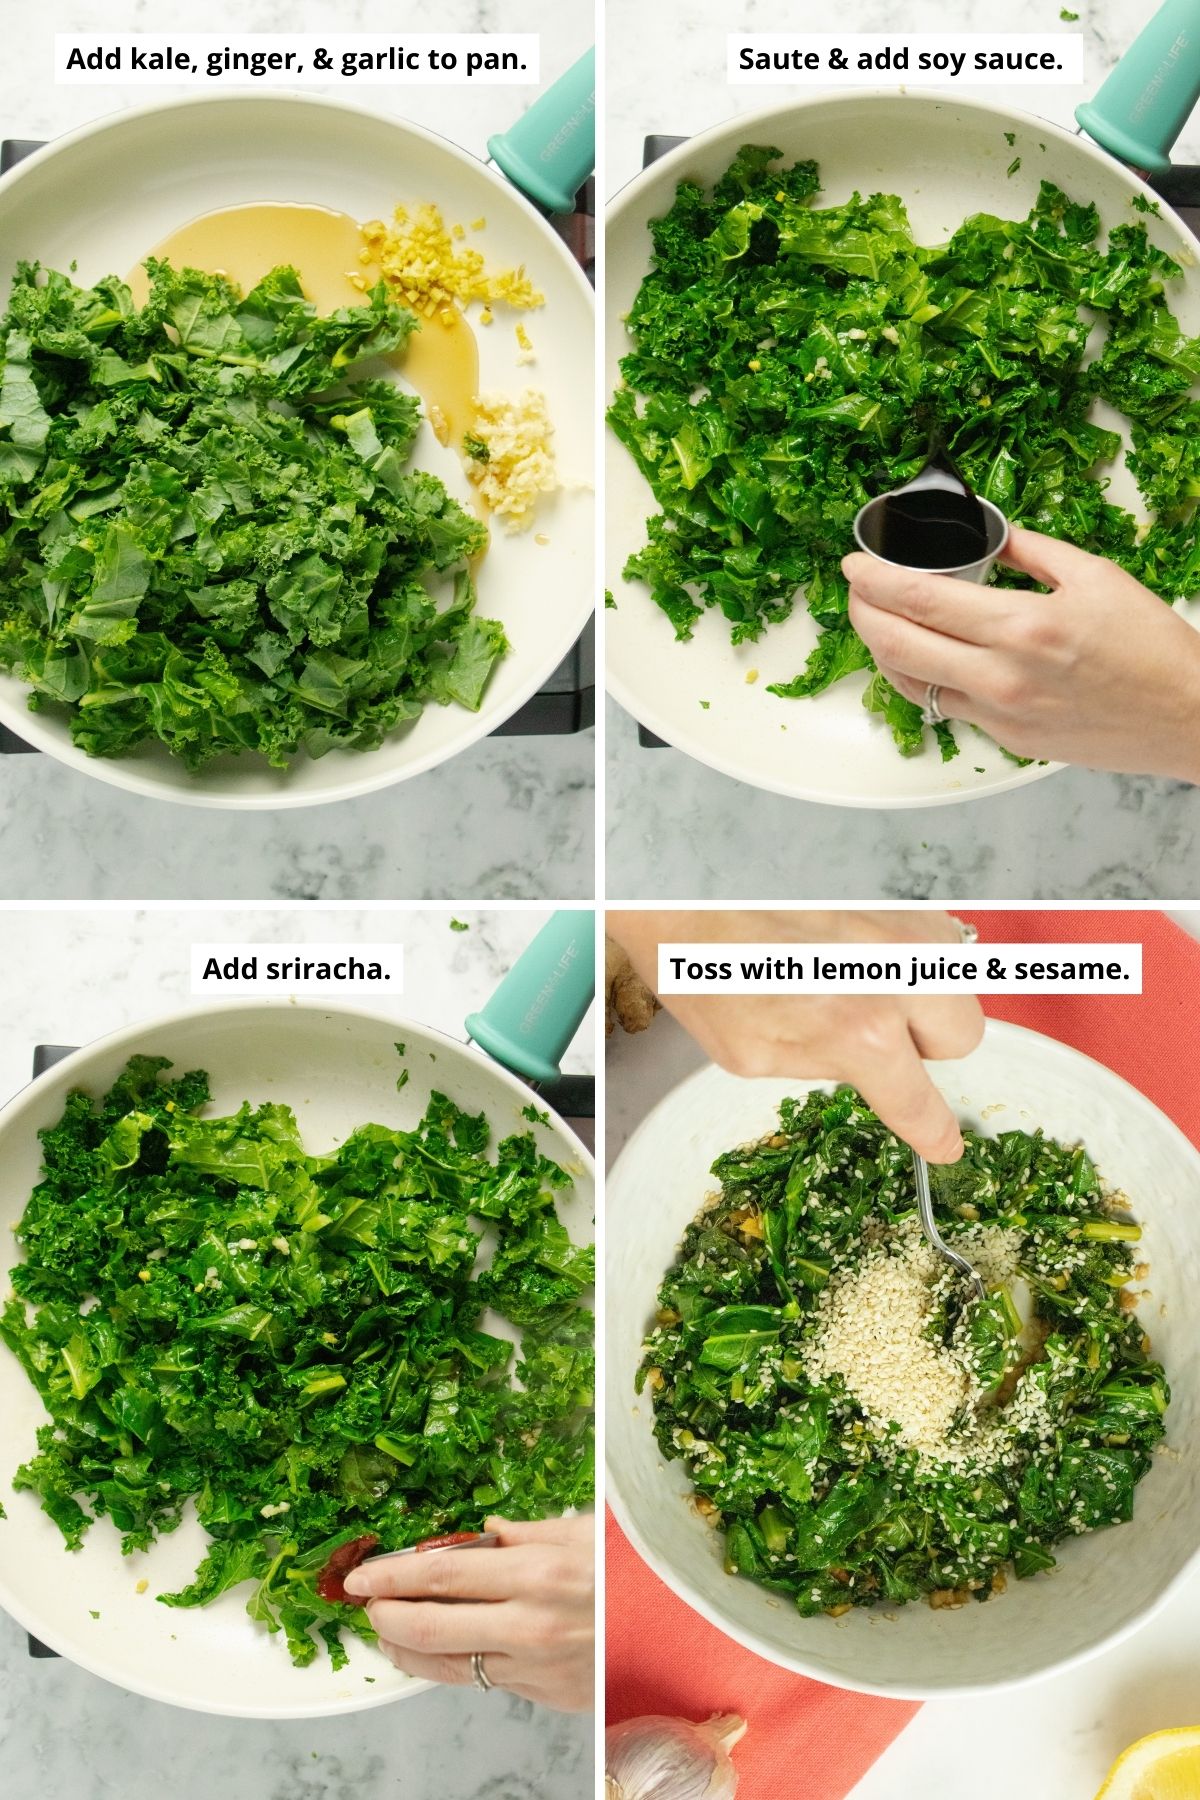 image collage showing adding the kale to the pan, adding the soy sauce and sriracha after cooking, and tossing with lemon and sesame seeds in the serving bowl